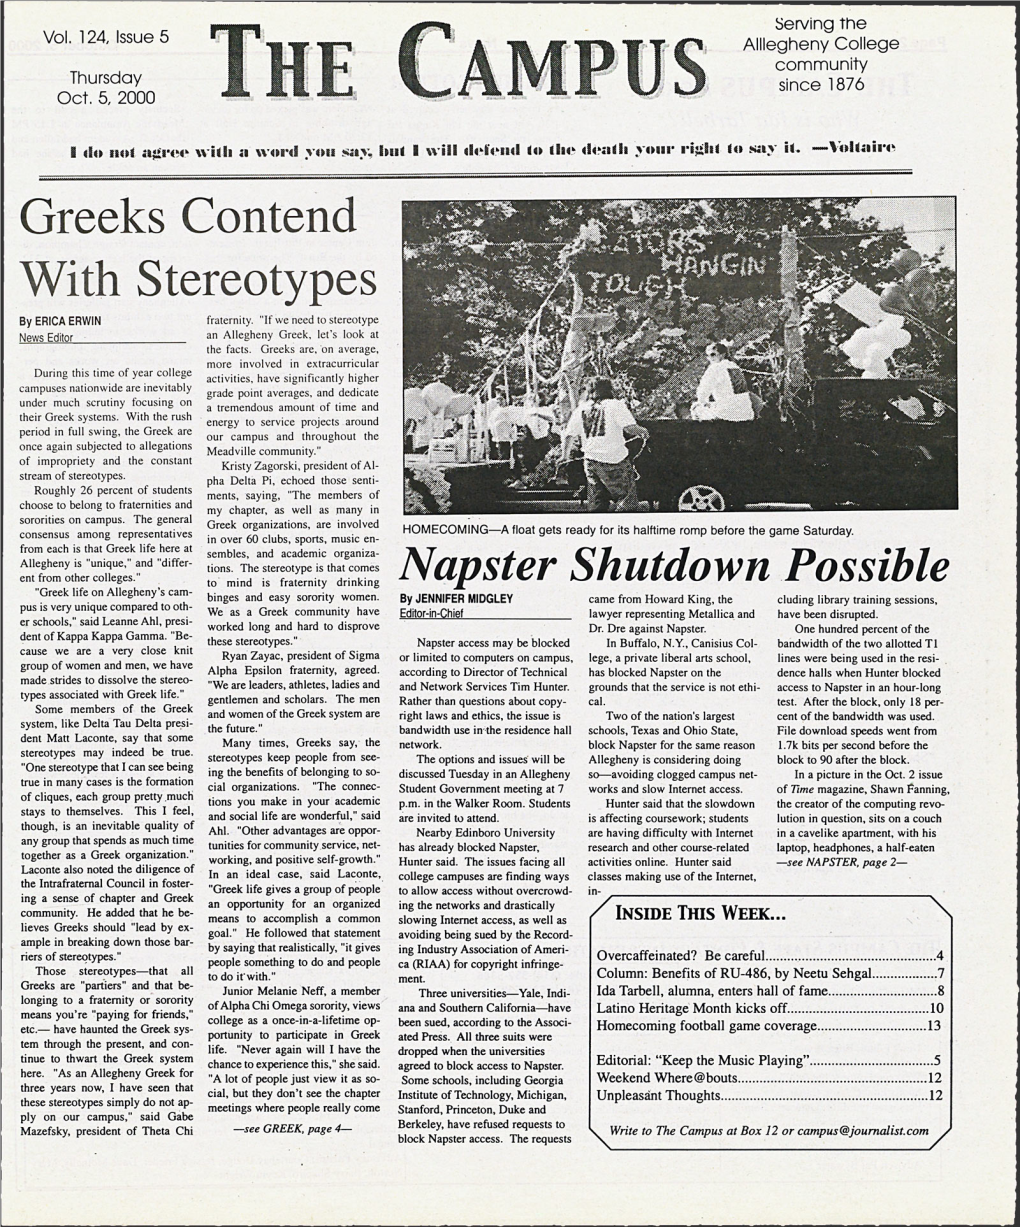 Greeks Contend with Stereotypes by ERICA ERWIN Fraternity